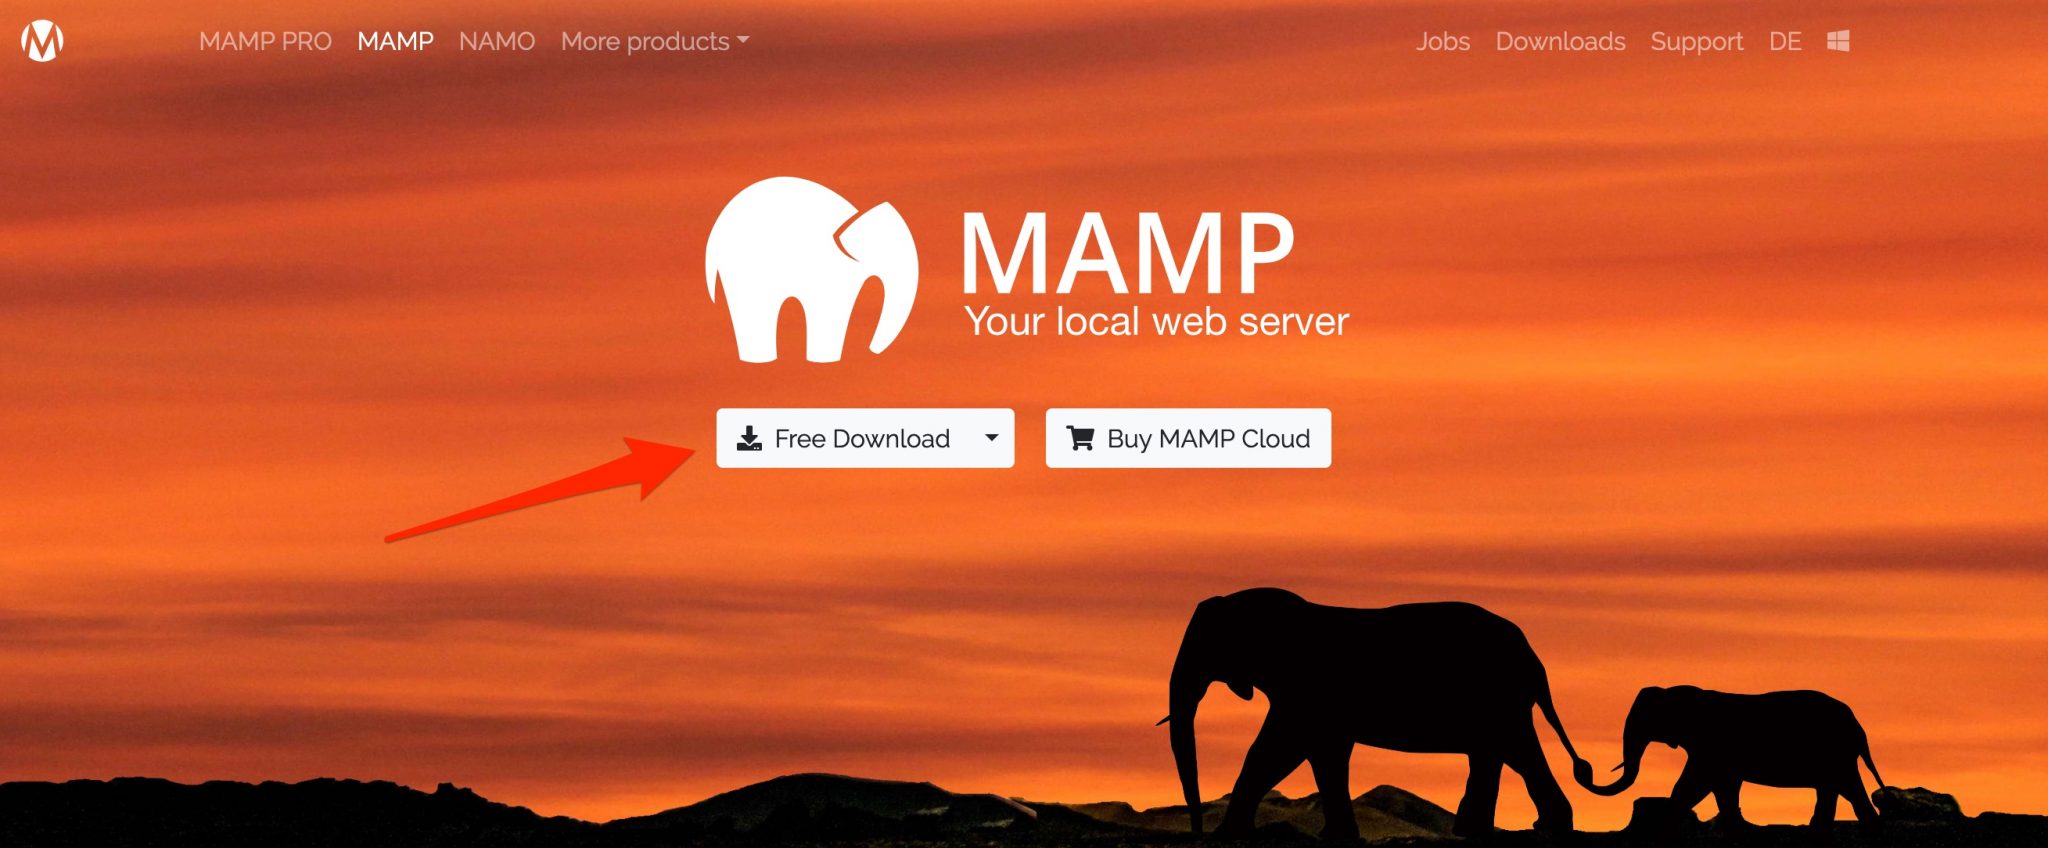 You can install WordPress in local with MAMP.